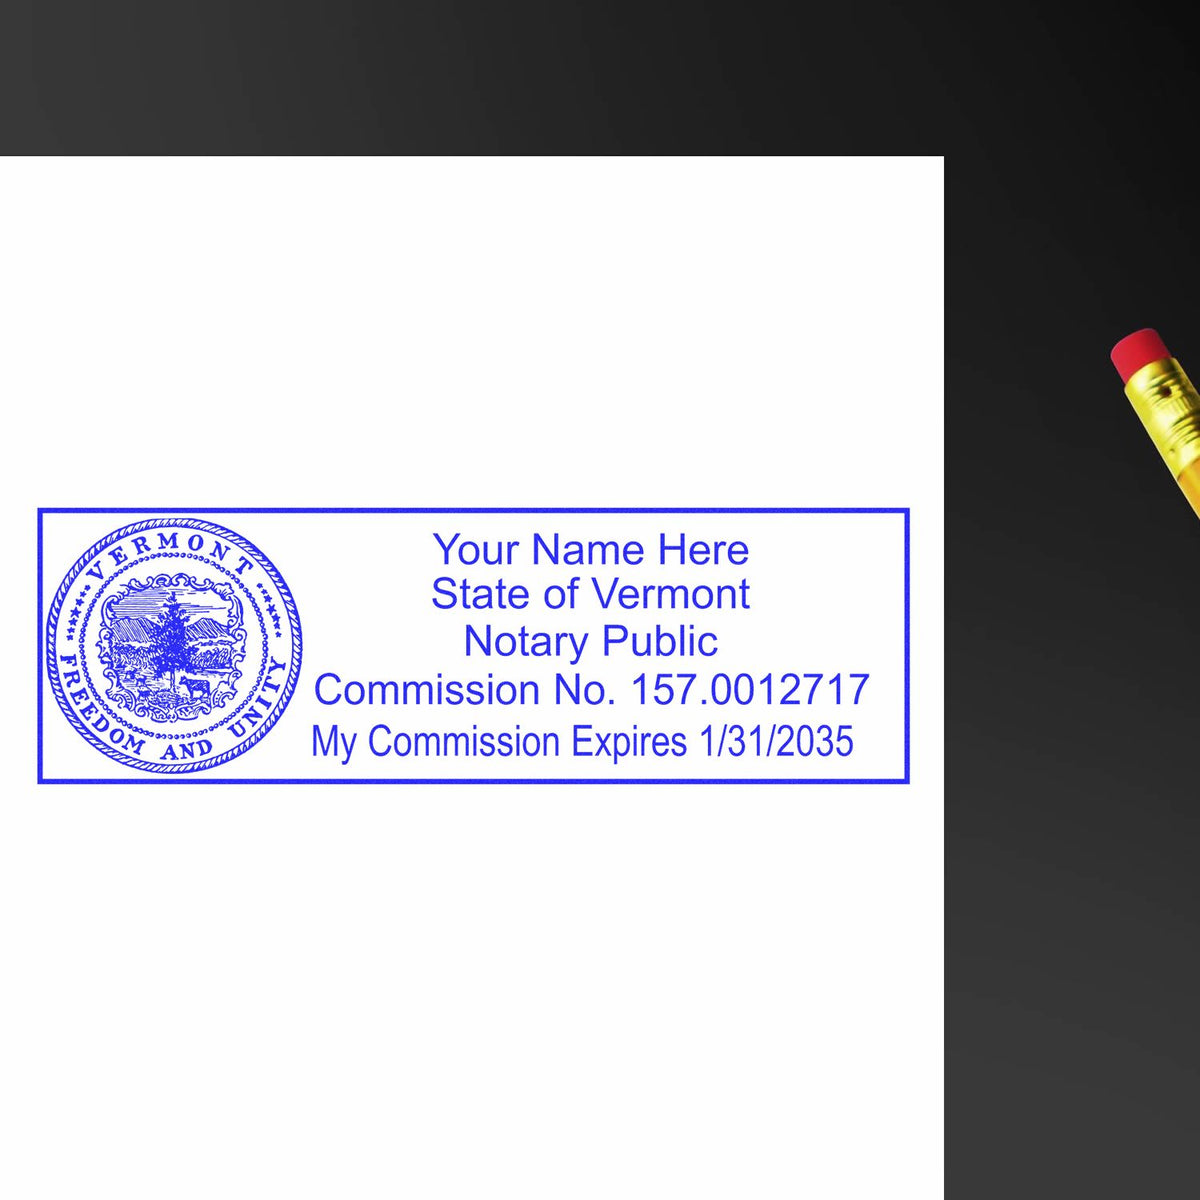 A lifestyle photo showing a stamped image of the Wooden Handle Vermont State Seal Notary Public Stamp on a piece of paper